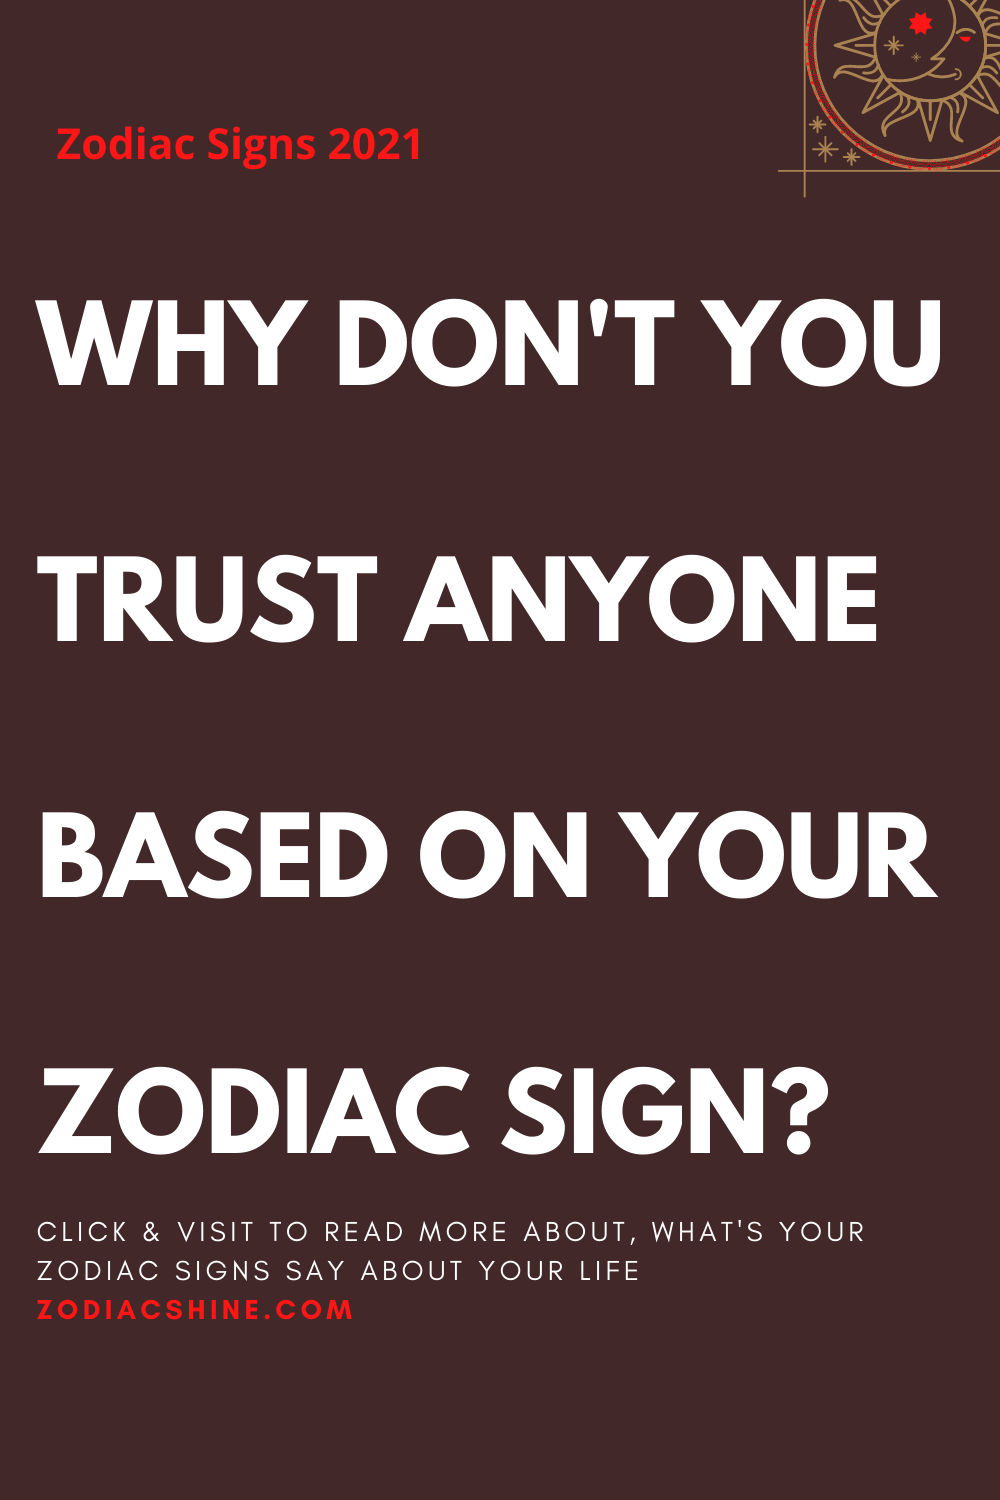 WHY DON'T YOU TRUST ANYONE BASED ON YOUR ZODIAC SIGN?